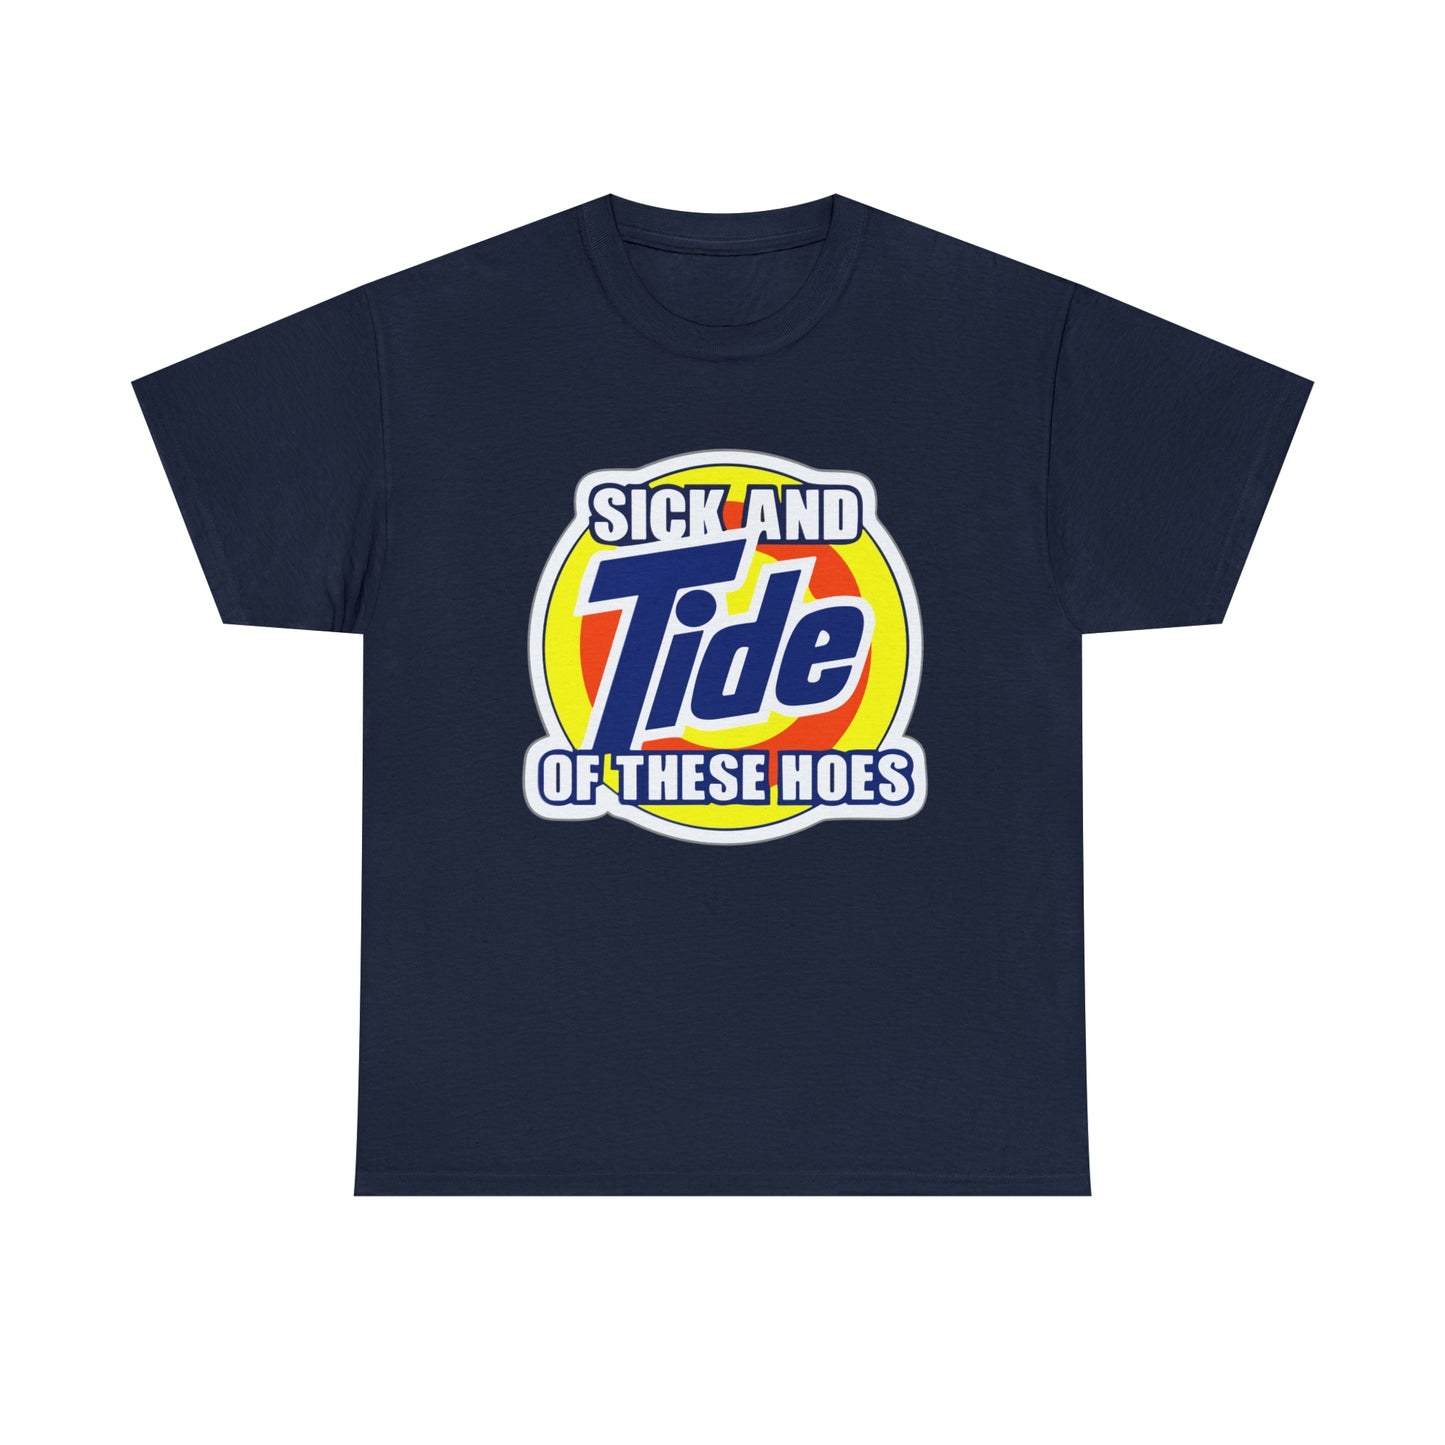 "Sick and Tide" Tee